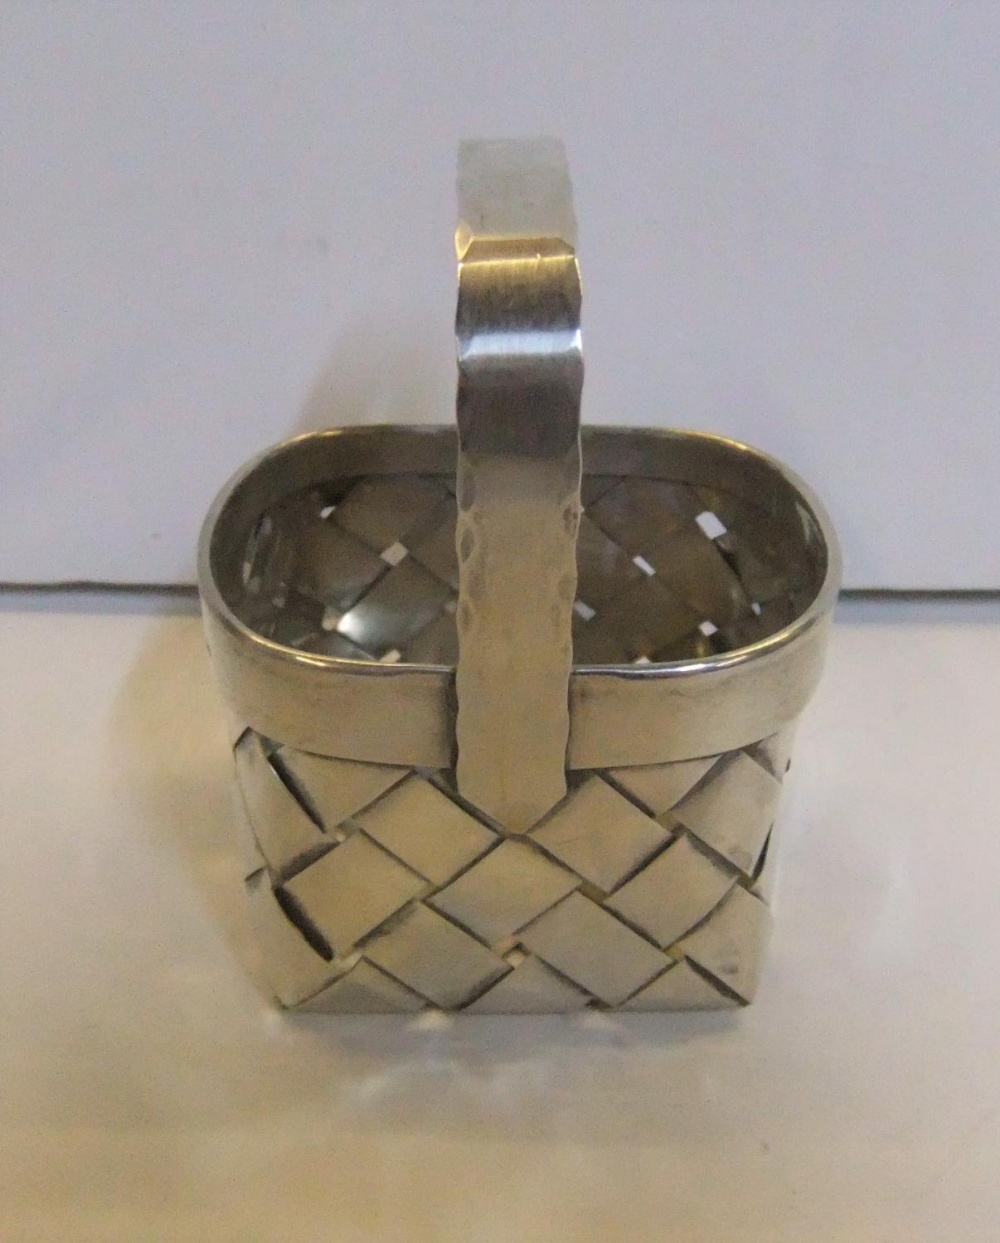 Charming miniature silver basket by Cartier, 6 cm long - Image 2 of 5